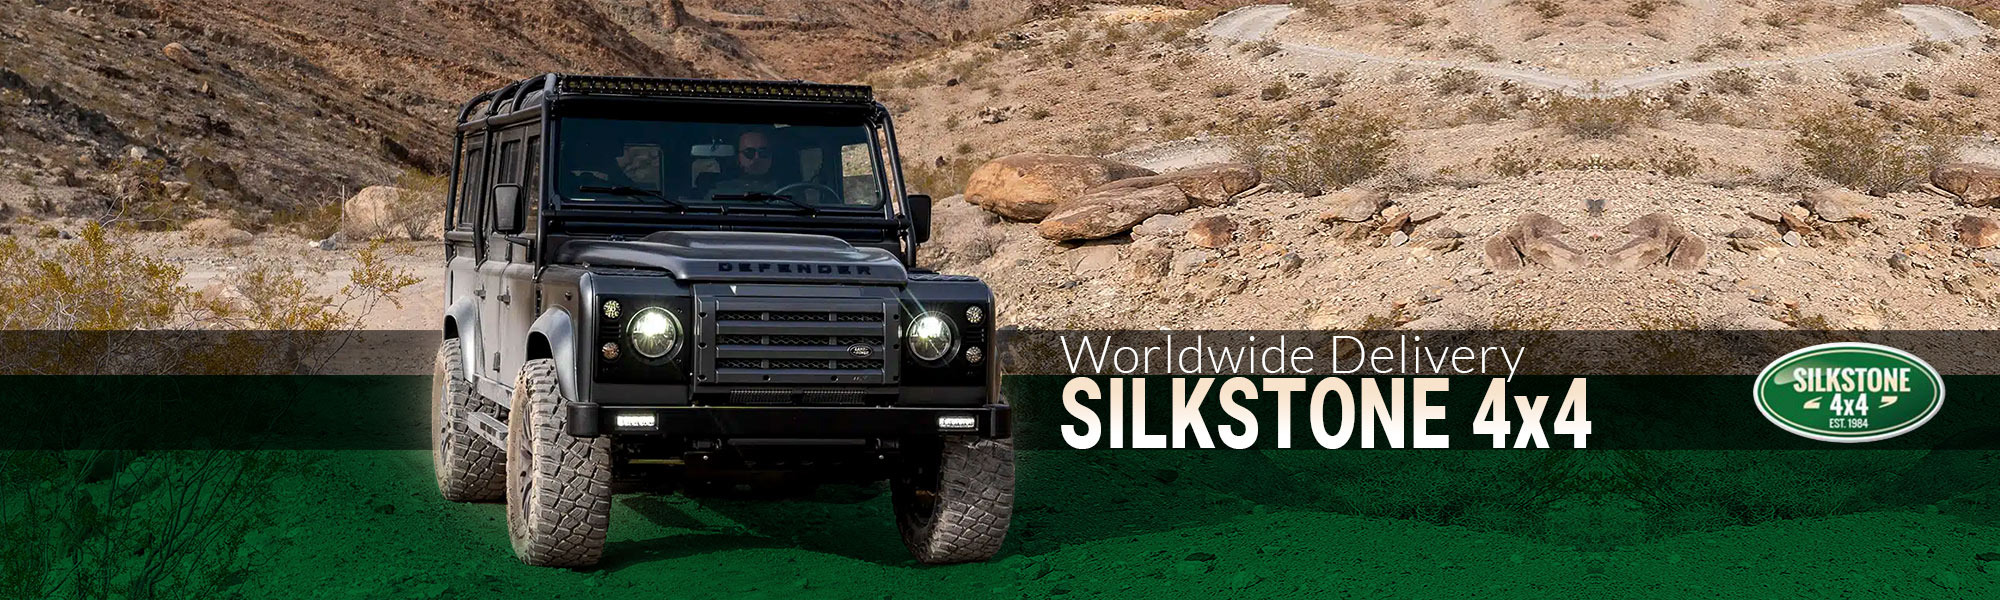 Worldwide Delivery and USA Exports at Silkstone 4x4,  Barnsley, South Yorkshire